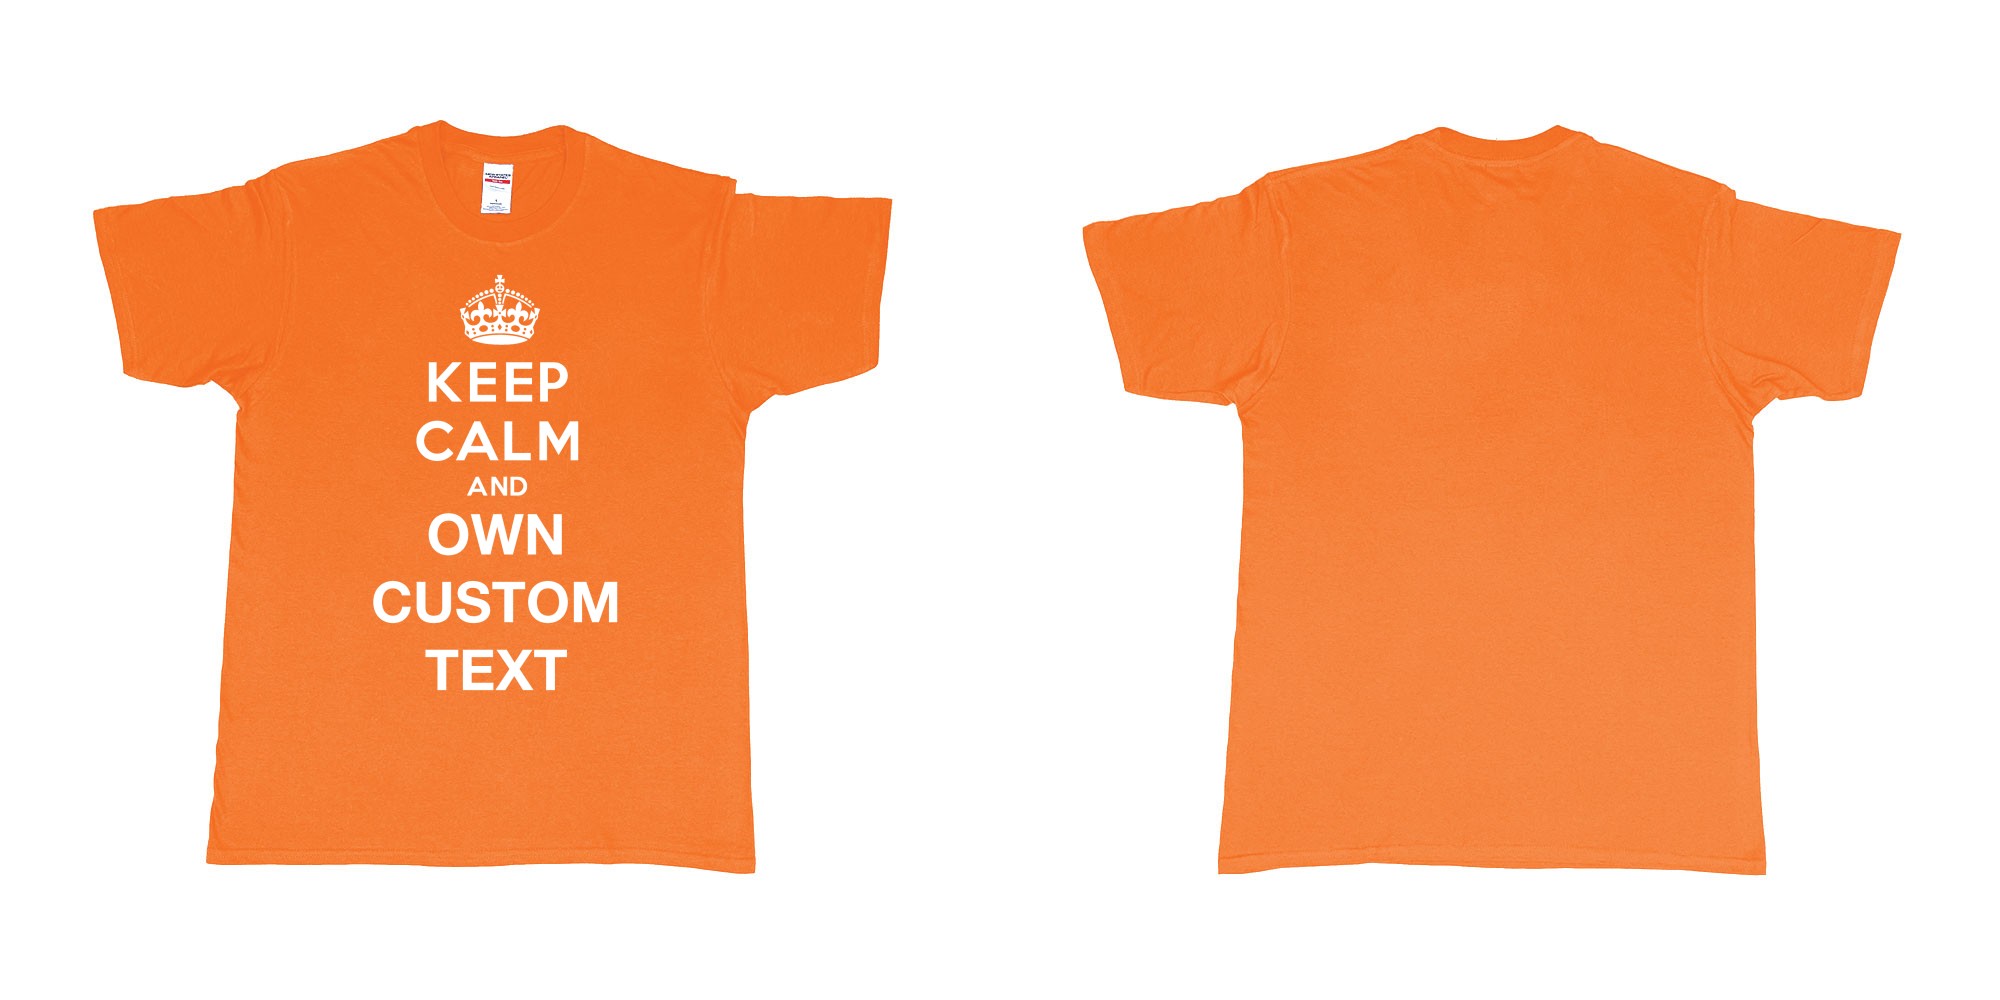 Custom tshirt design Keep Calm And in fabric color orange choice your own text made in Bali by The Pirate Way